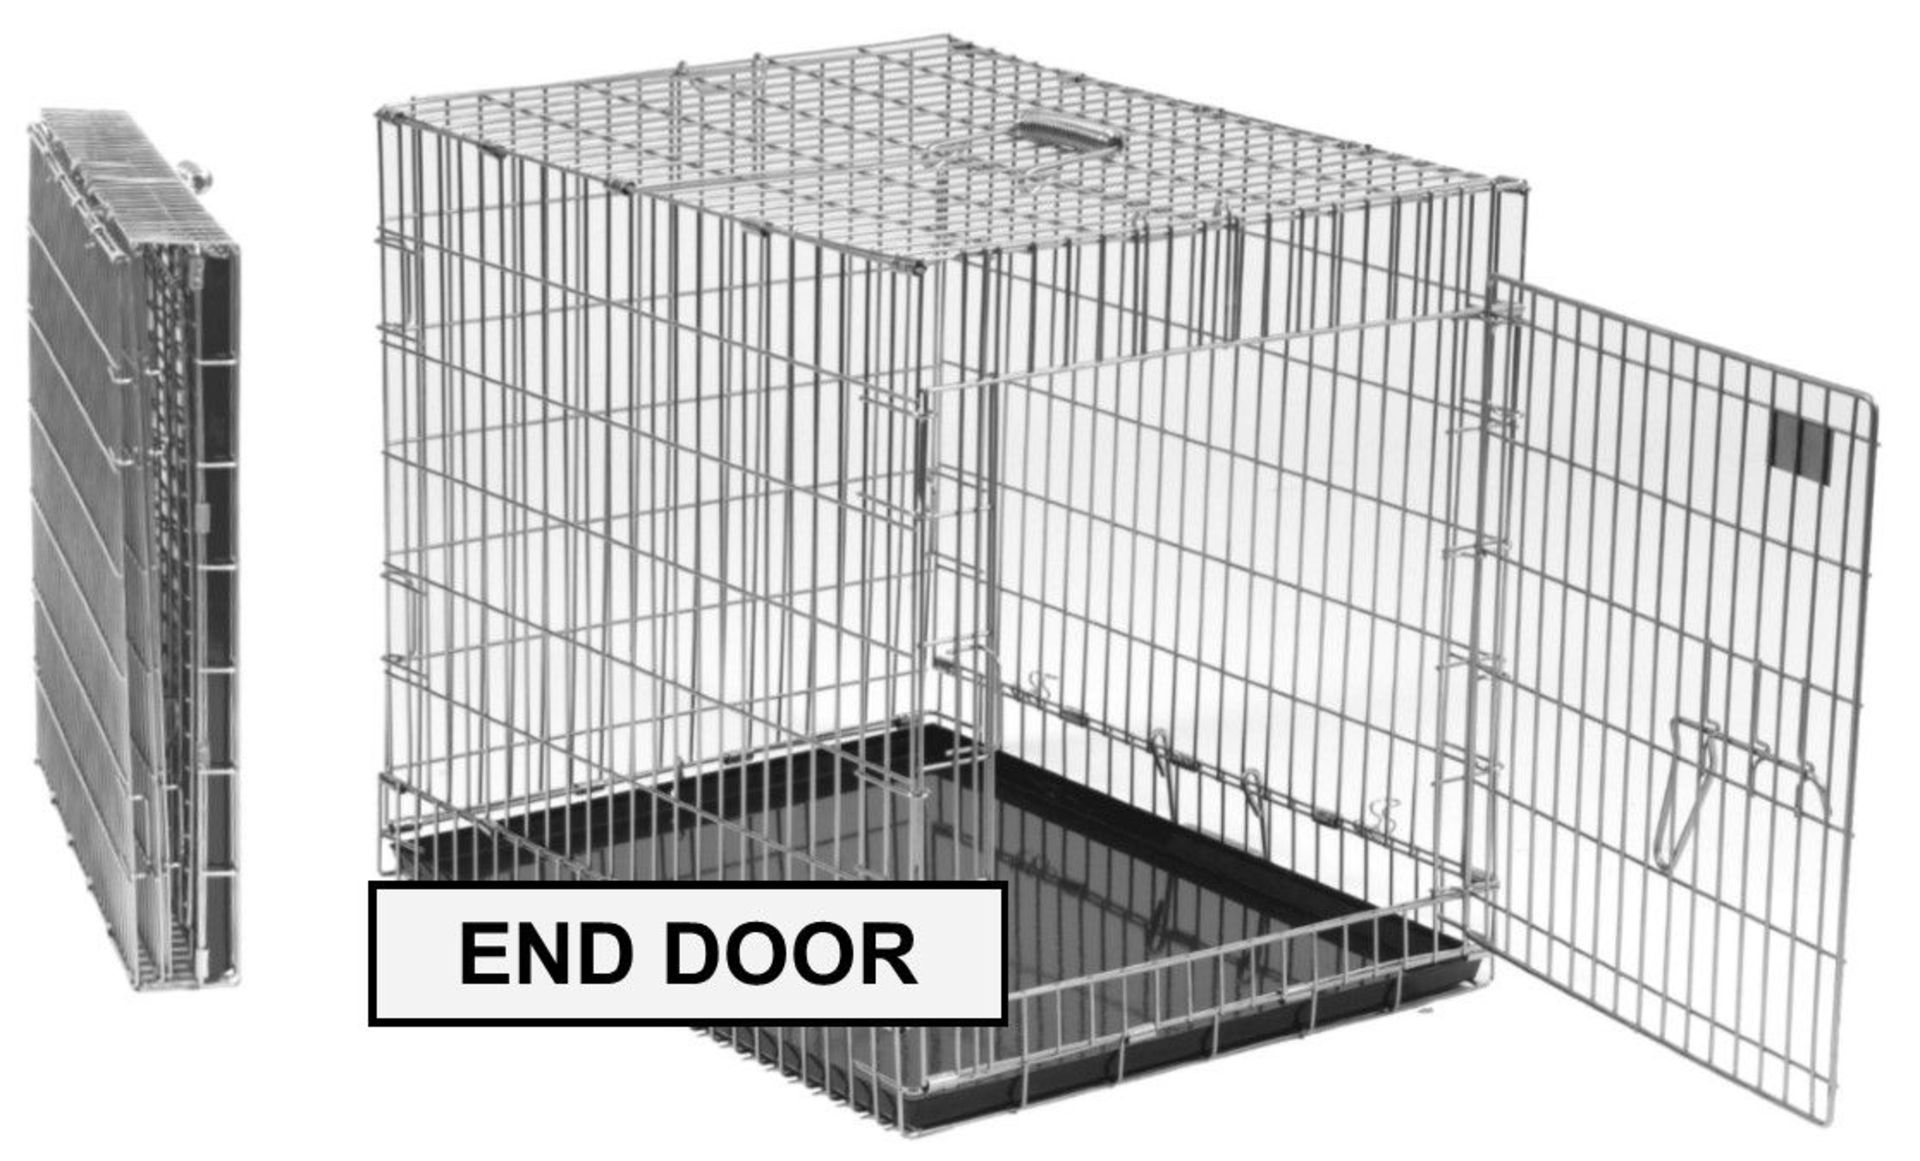 6 x Showman Foldaway Dog Crate with Single End Door 38". Total RRP £552